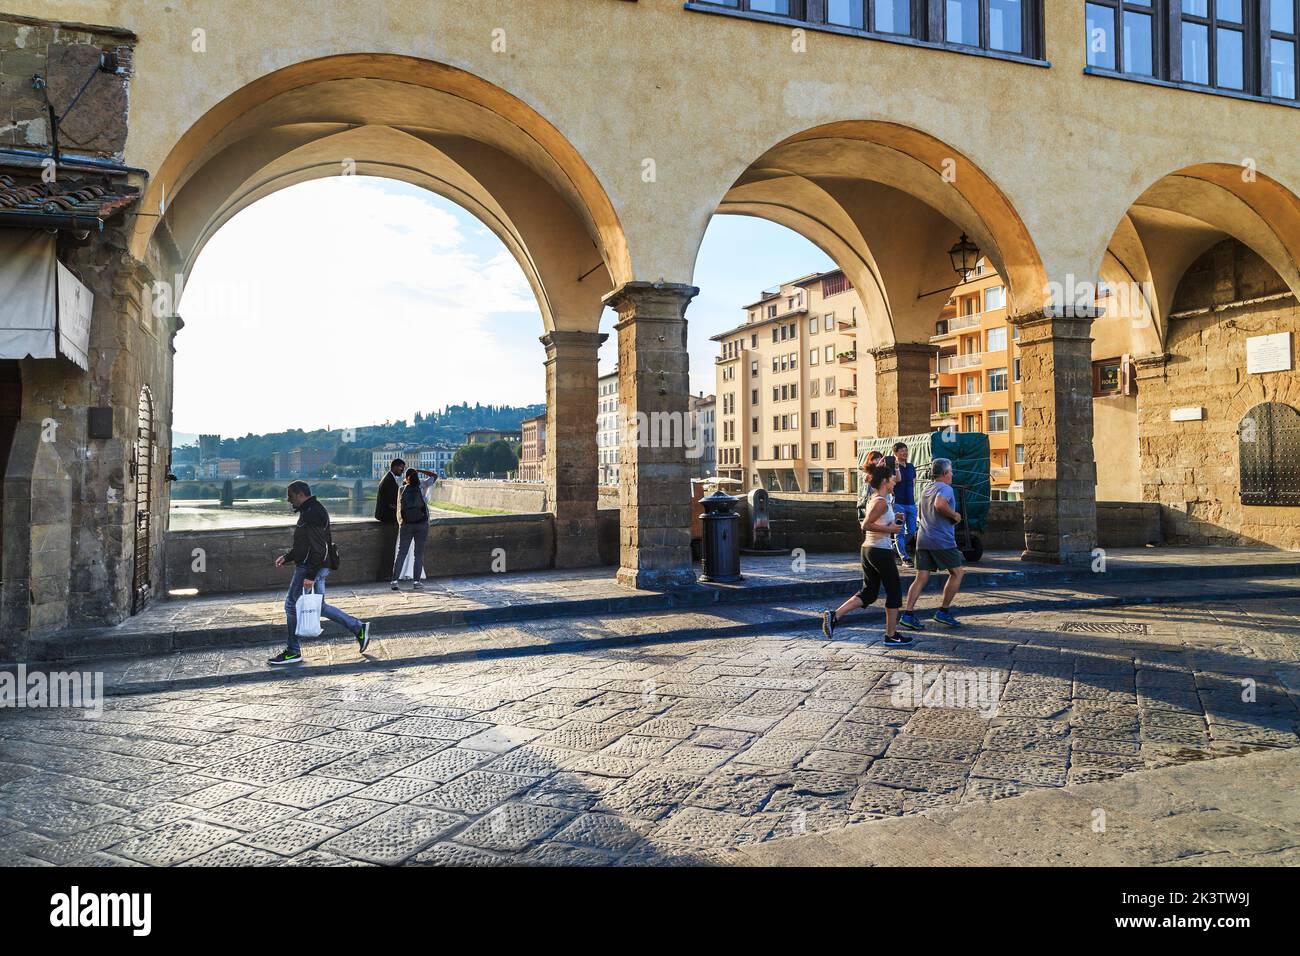 FLORENCE, ITALY - SEPTEMNER 18, 2018: This is a gap between the houses on the medieval Old Bridge (Ponte Vecchio) under the Vasari Corridor on an autu Stock Photo